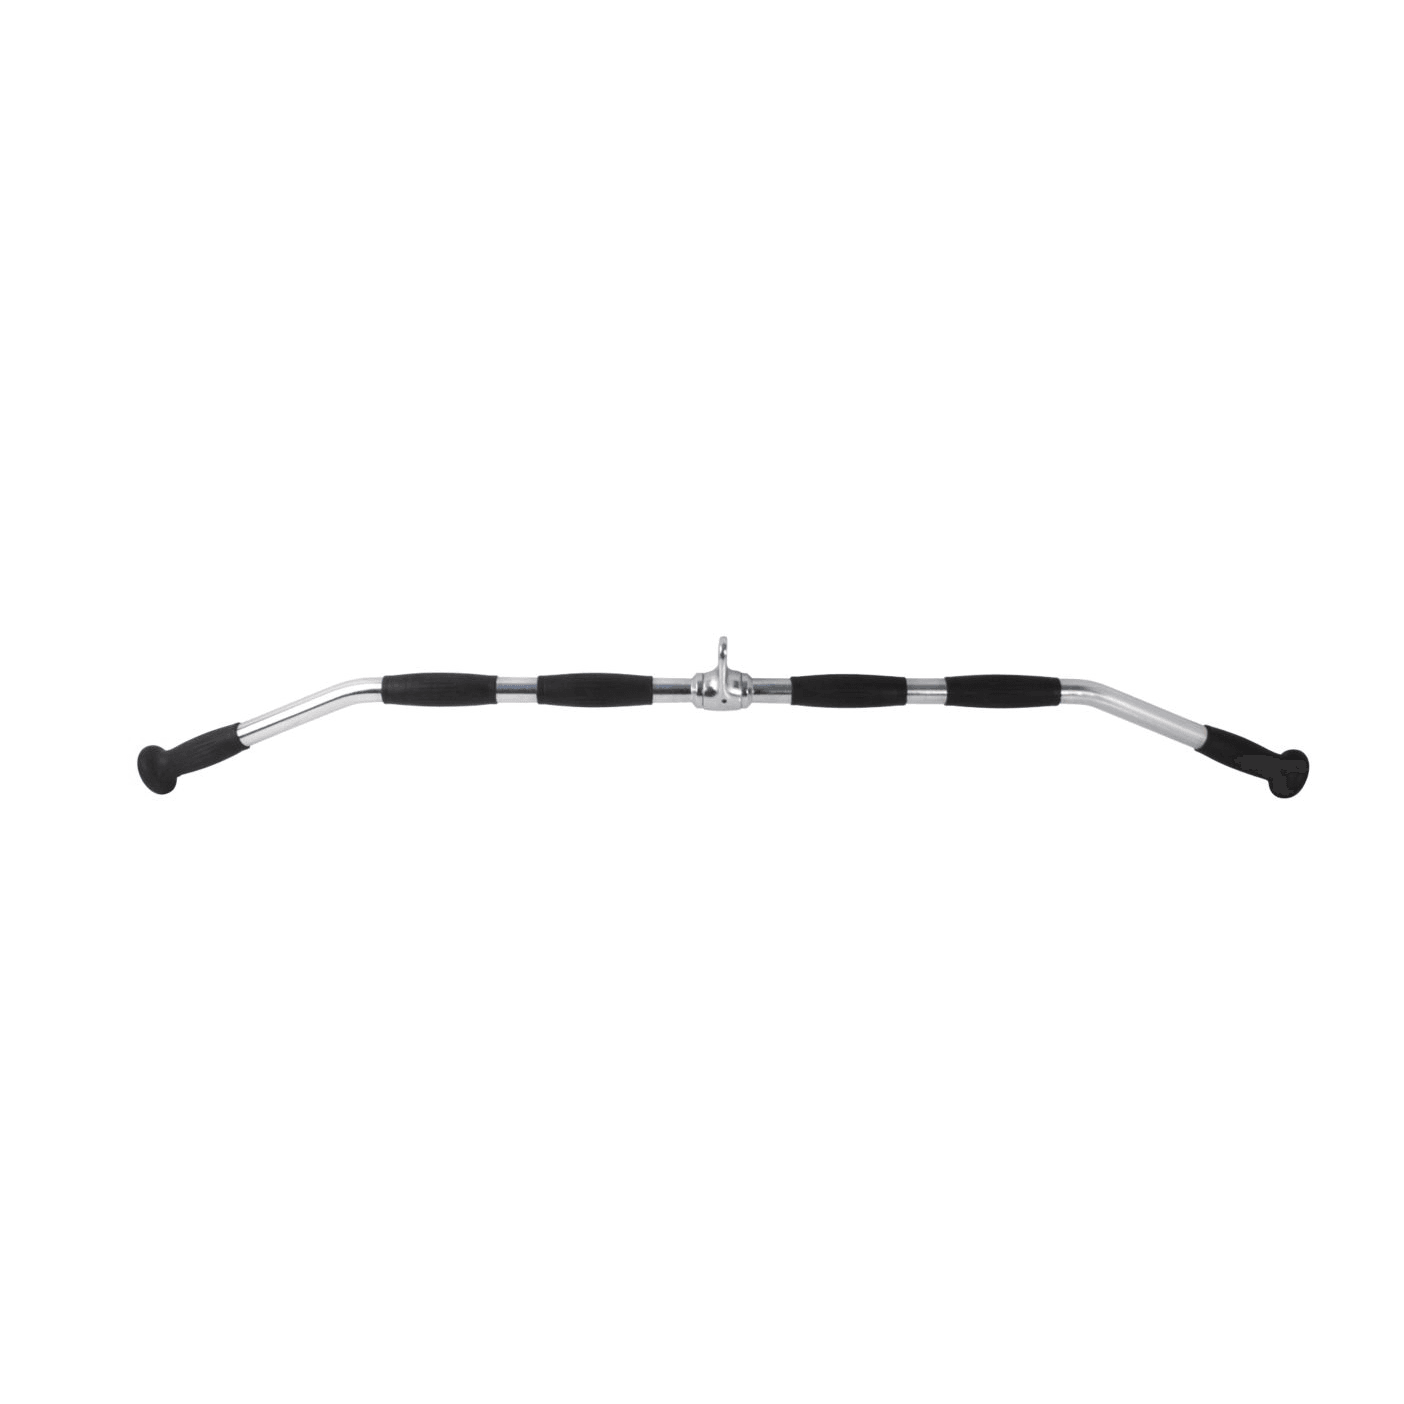 USA Olympic Style 48" Lat Bar . . Great Buy! - ExerciseUnlimited